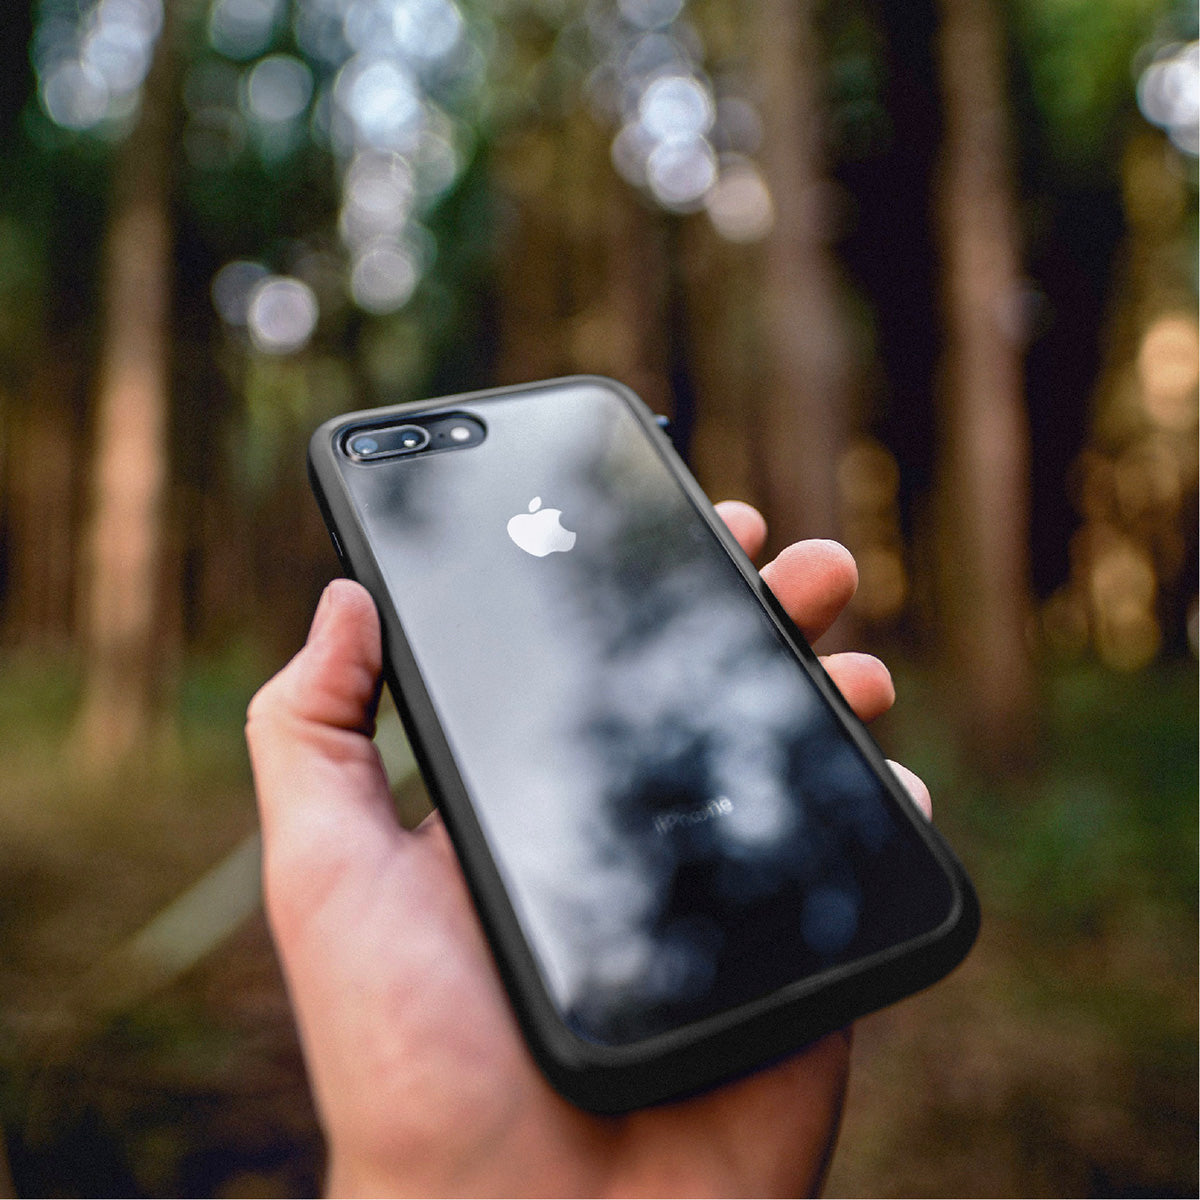 Catalyst Impact Protection Case for iPhone 8 Plus and 7 Plus showing the case outdoor